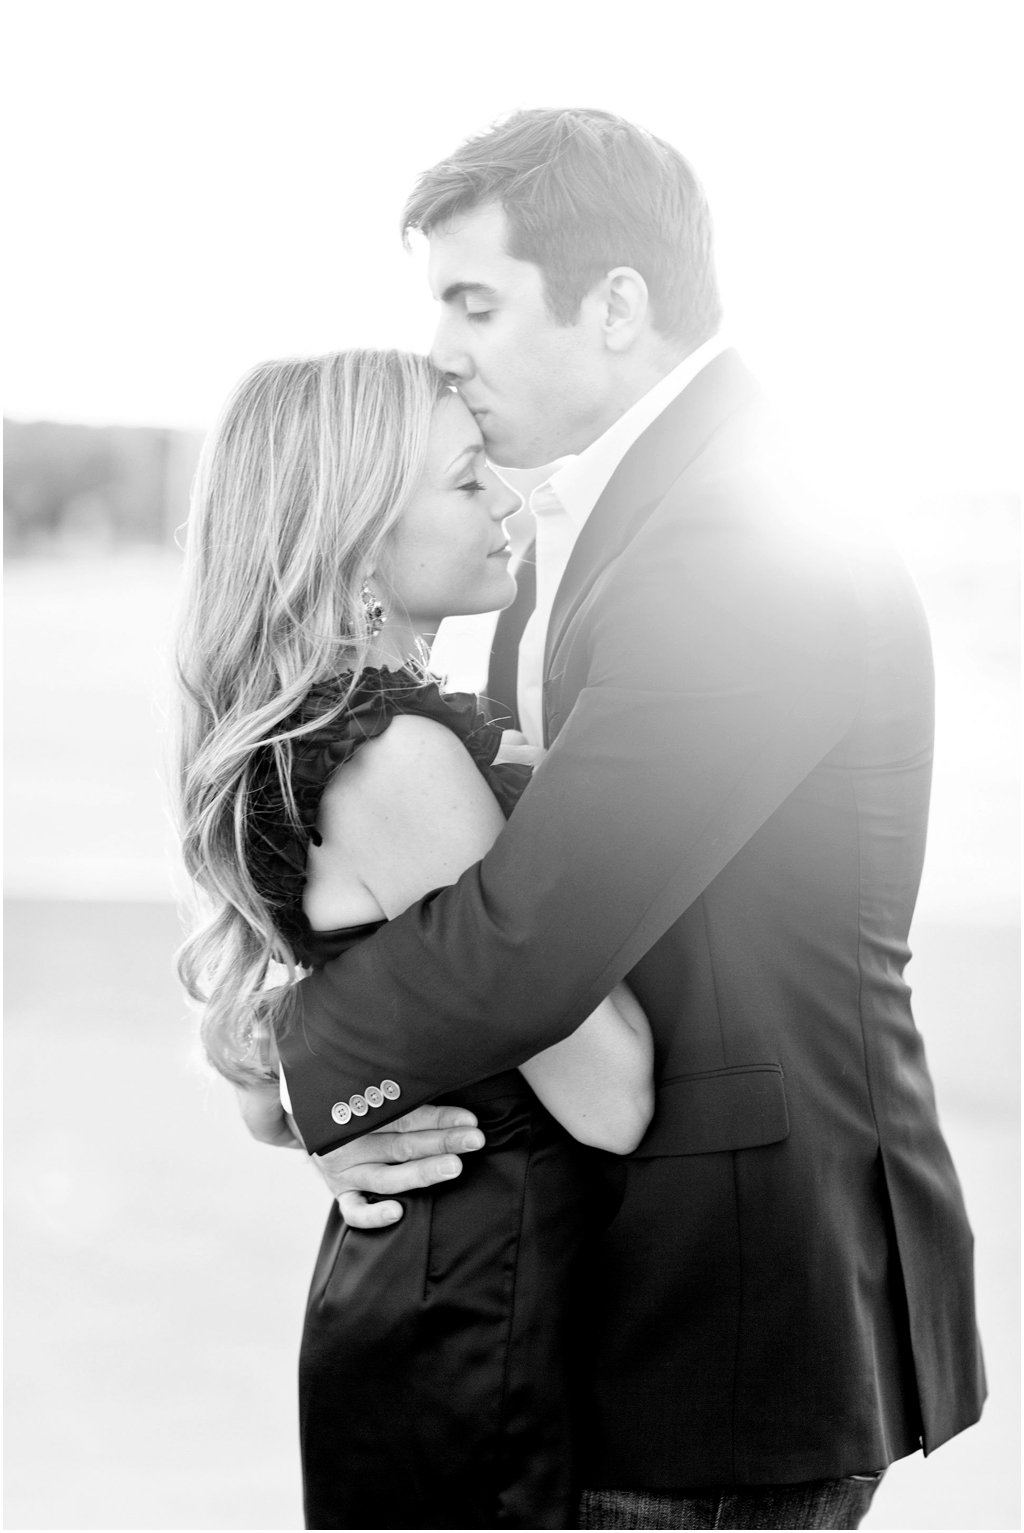 View More: http://maryfieldsphotography.pass.us/snyder-engagement-2014